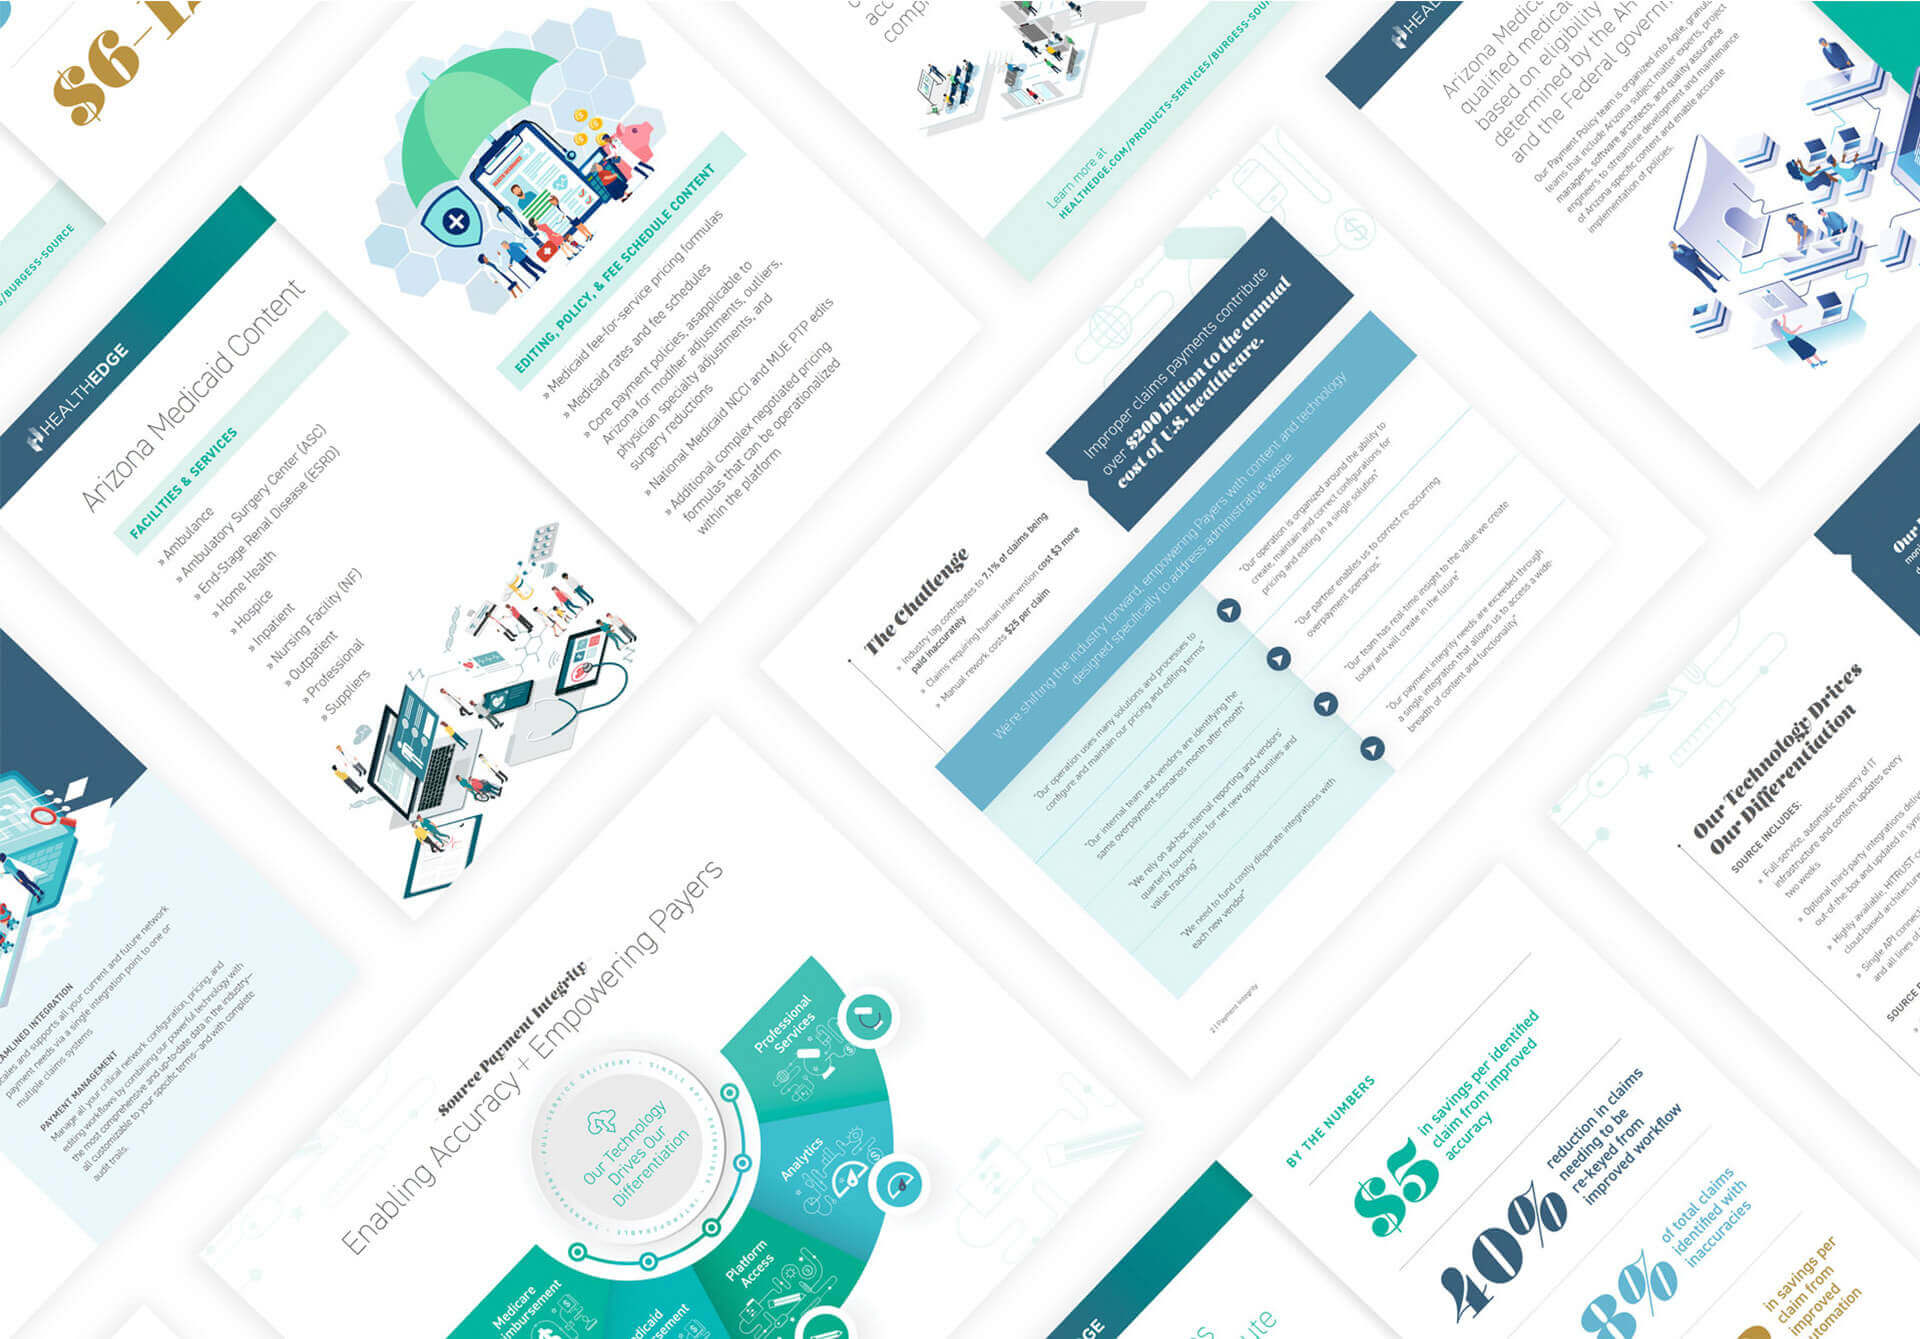 HealthEdge graphic design for healthcare software